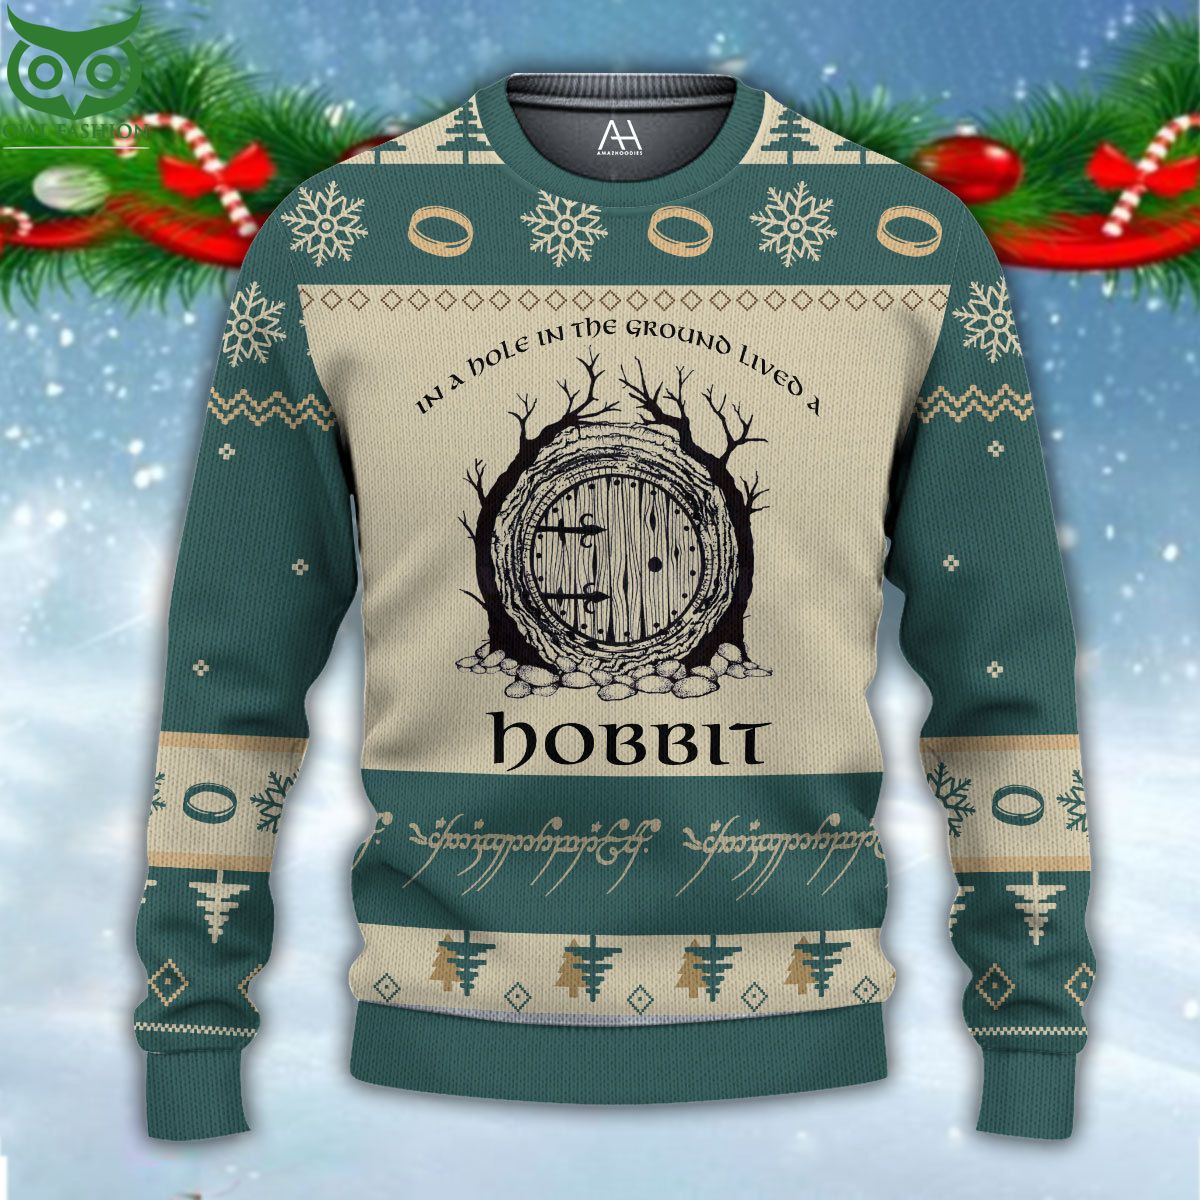 The Hobbit Ugly Sweater Merry Christmas Cuteness overloaded